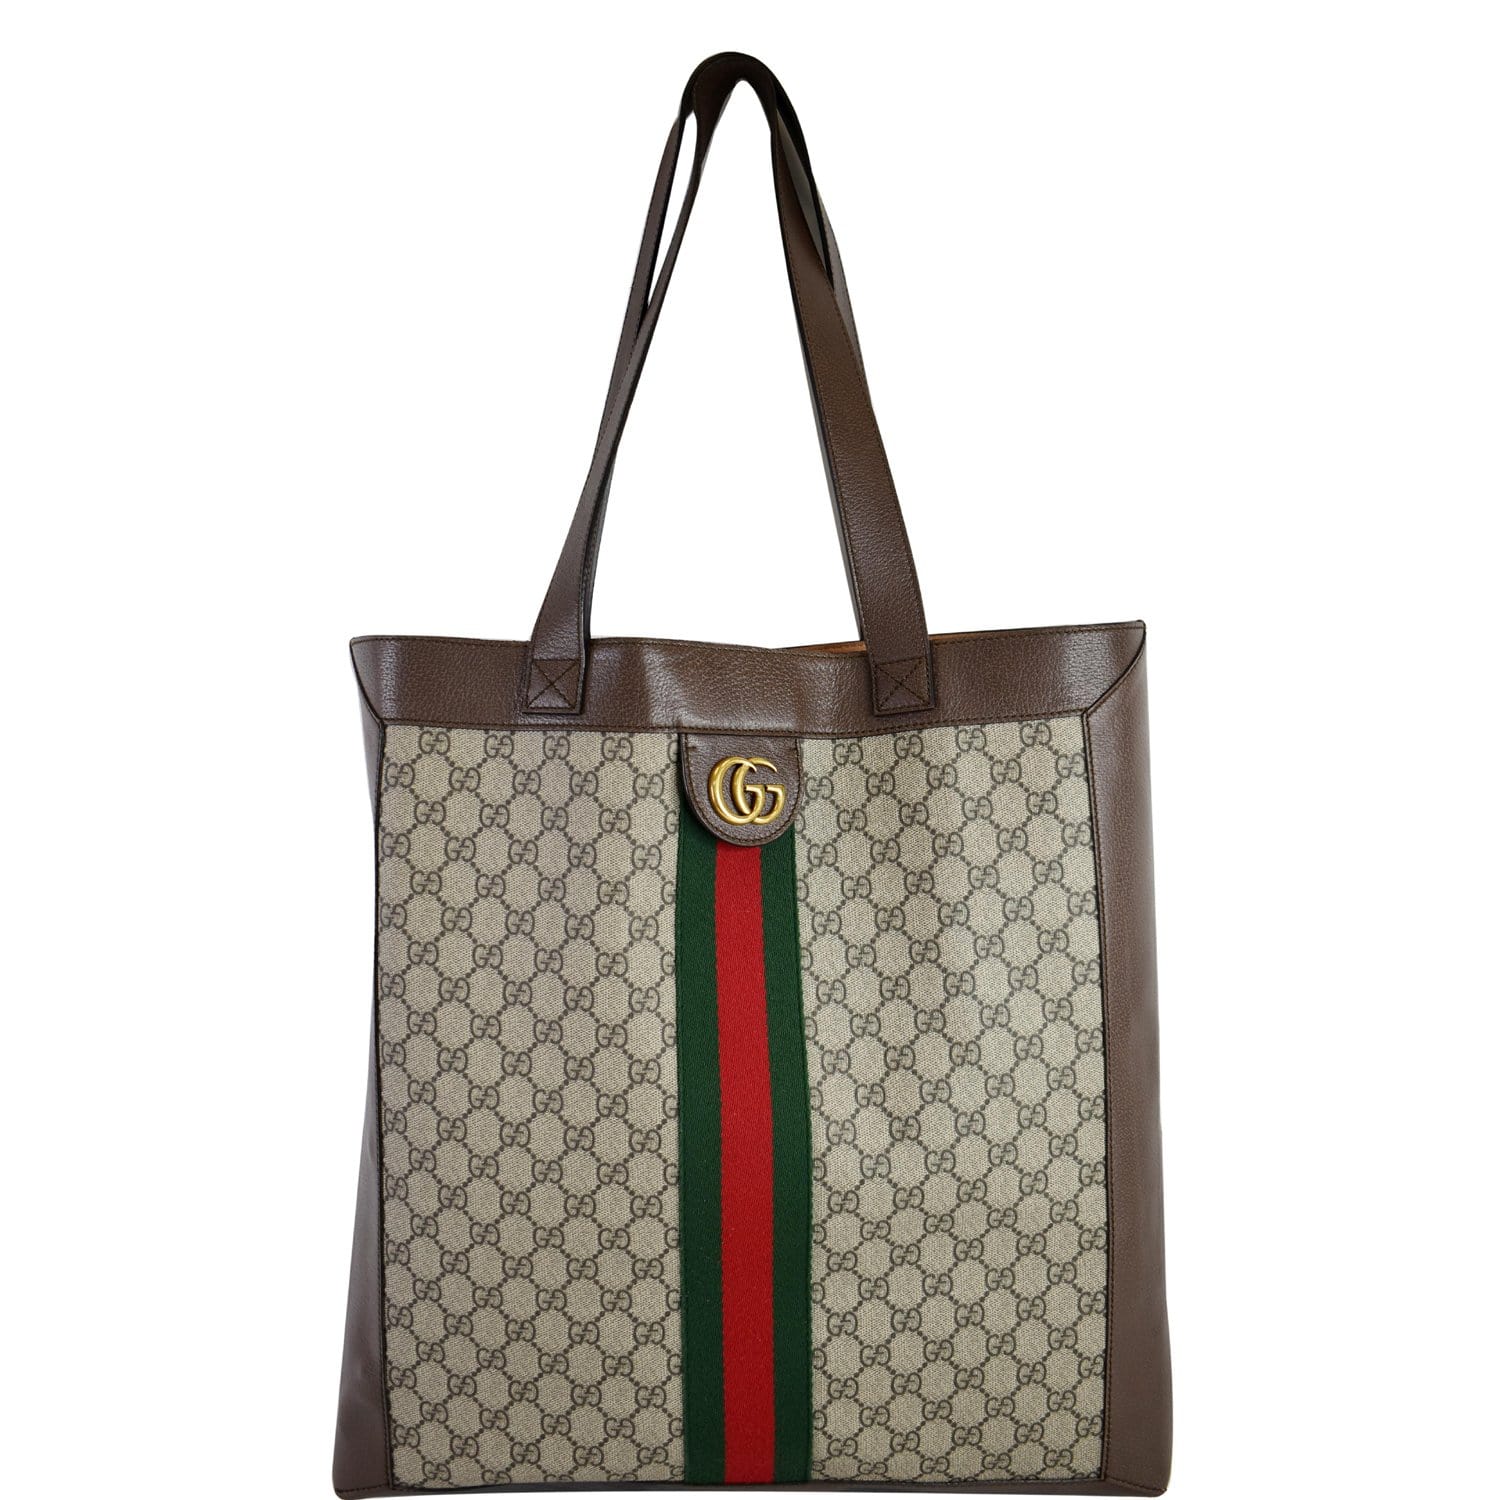 Gucci Ophidia Large Tote Bag, Beige, GG Canvas